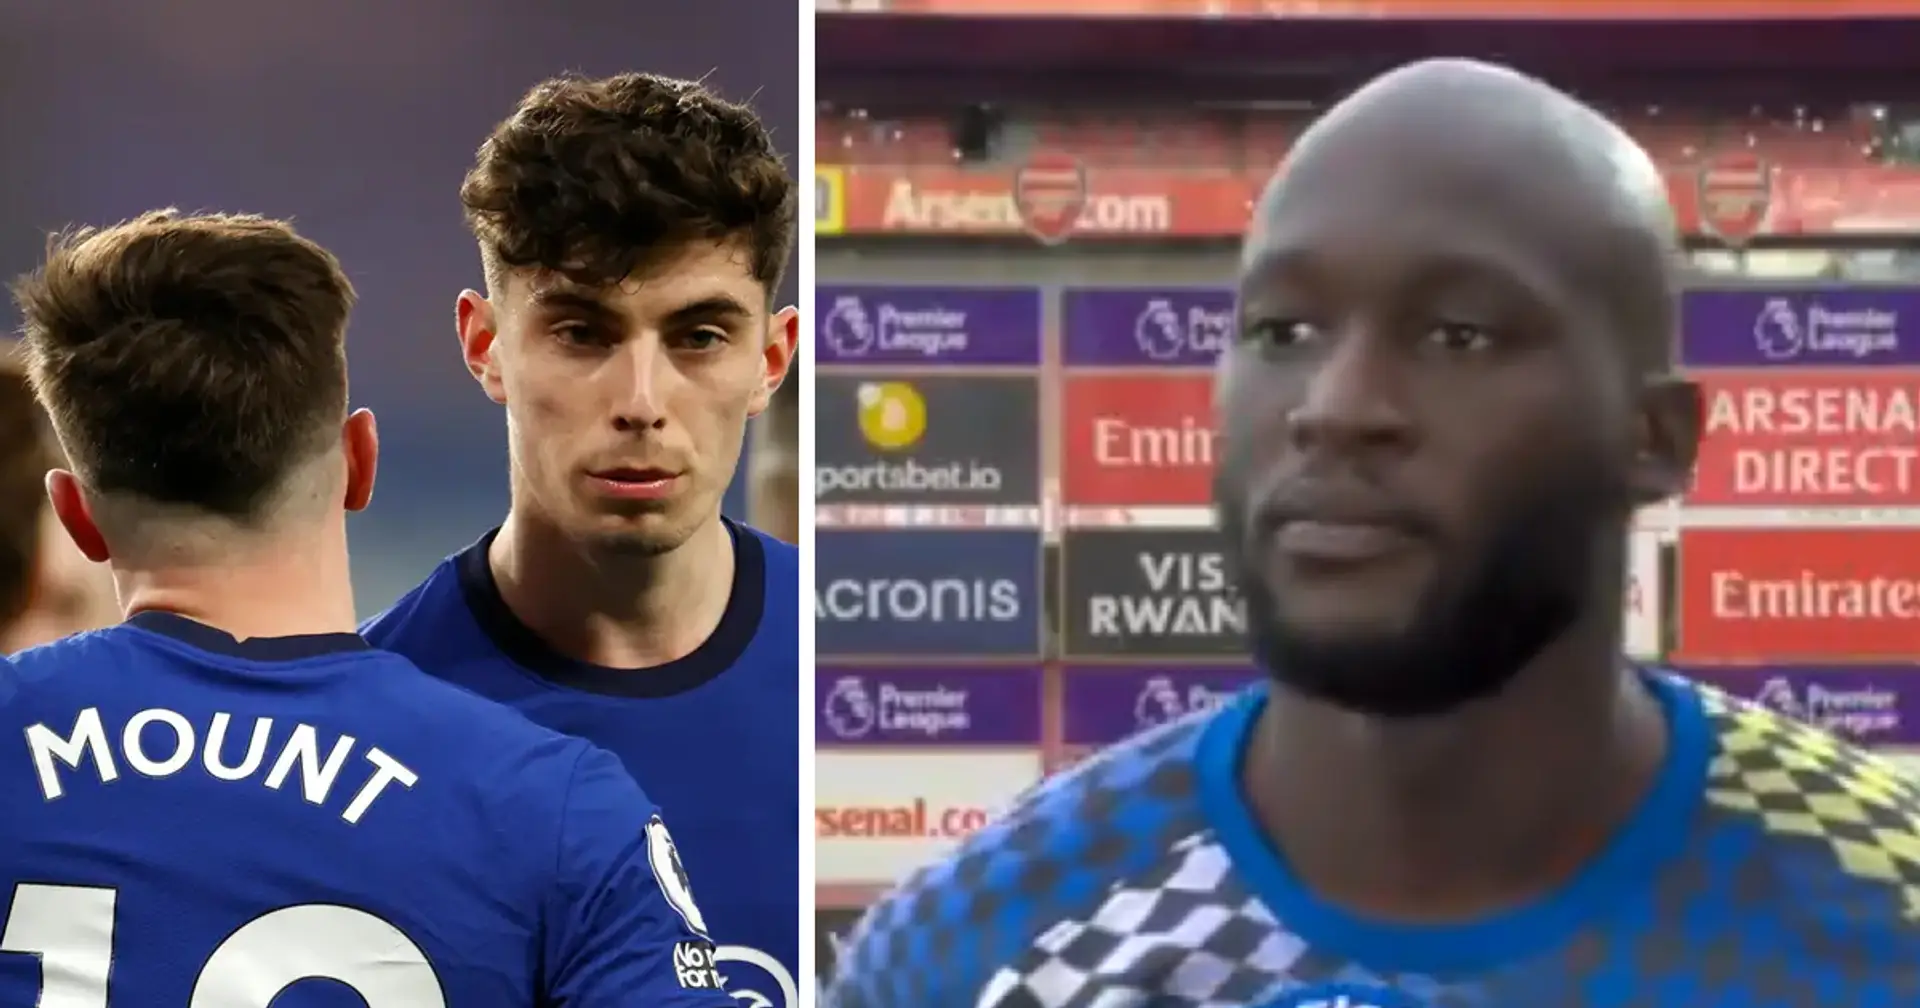 'I'm blessed to be in this situation': Lukaku on linking up with Mount and Havertz